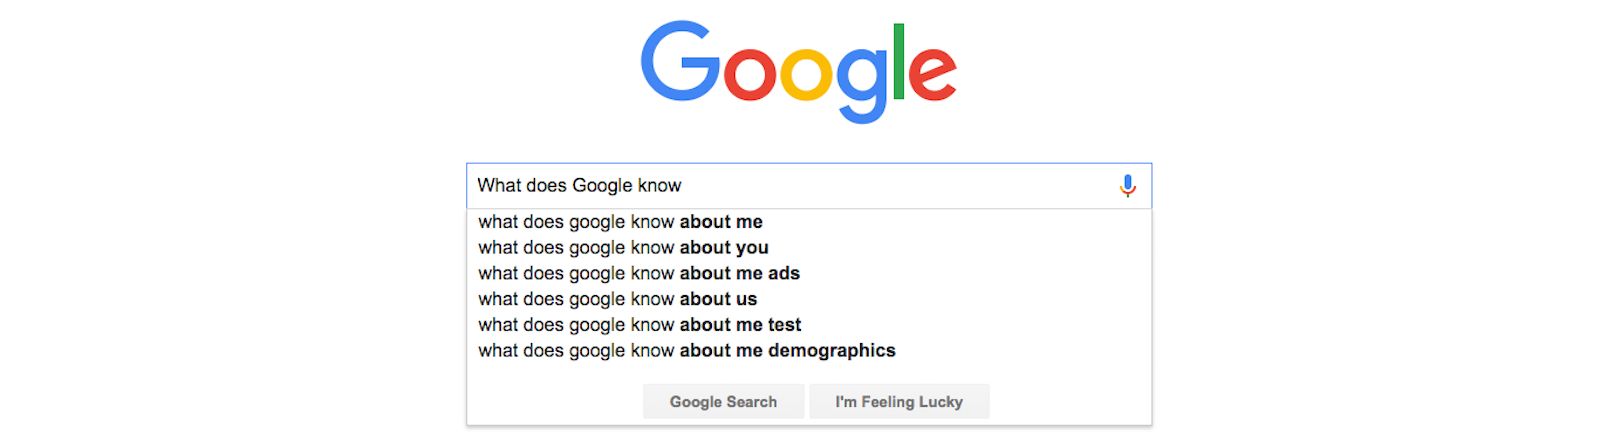 What does Google know about me?